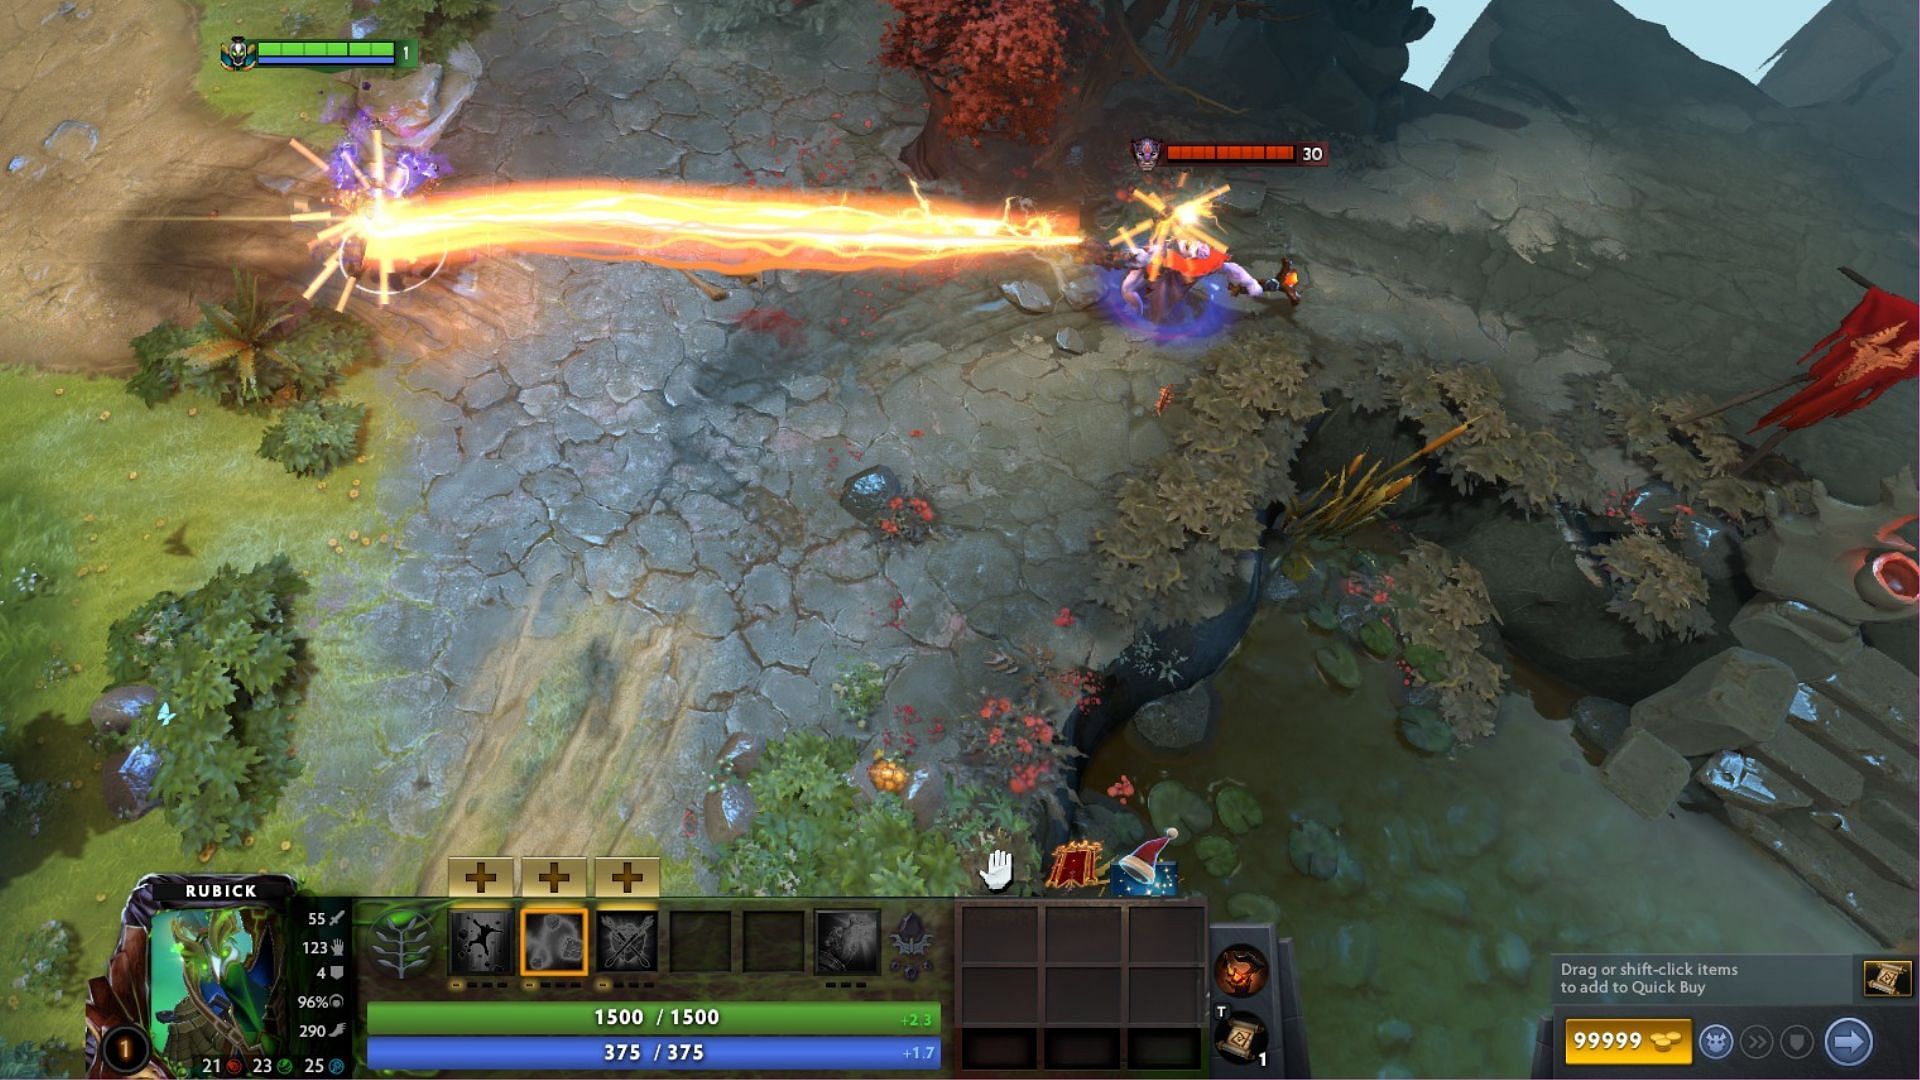 Level 1 Rubick tanking Finger of Death with Unwavering Condition (Image via Steam Screenshot/Valve)